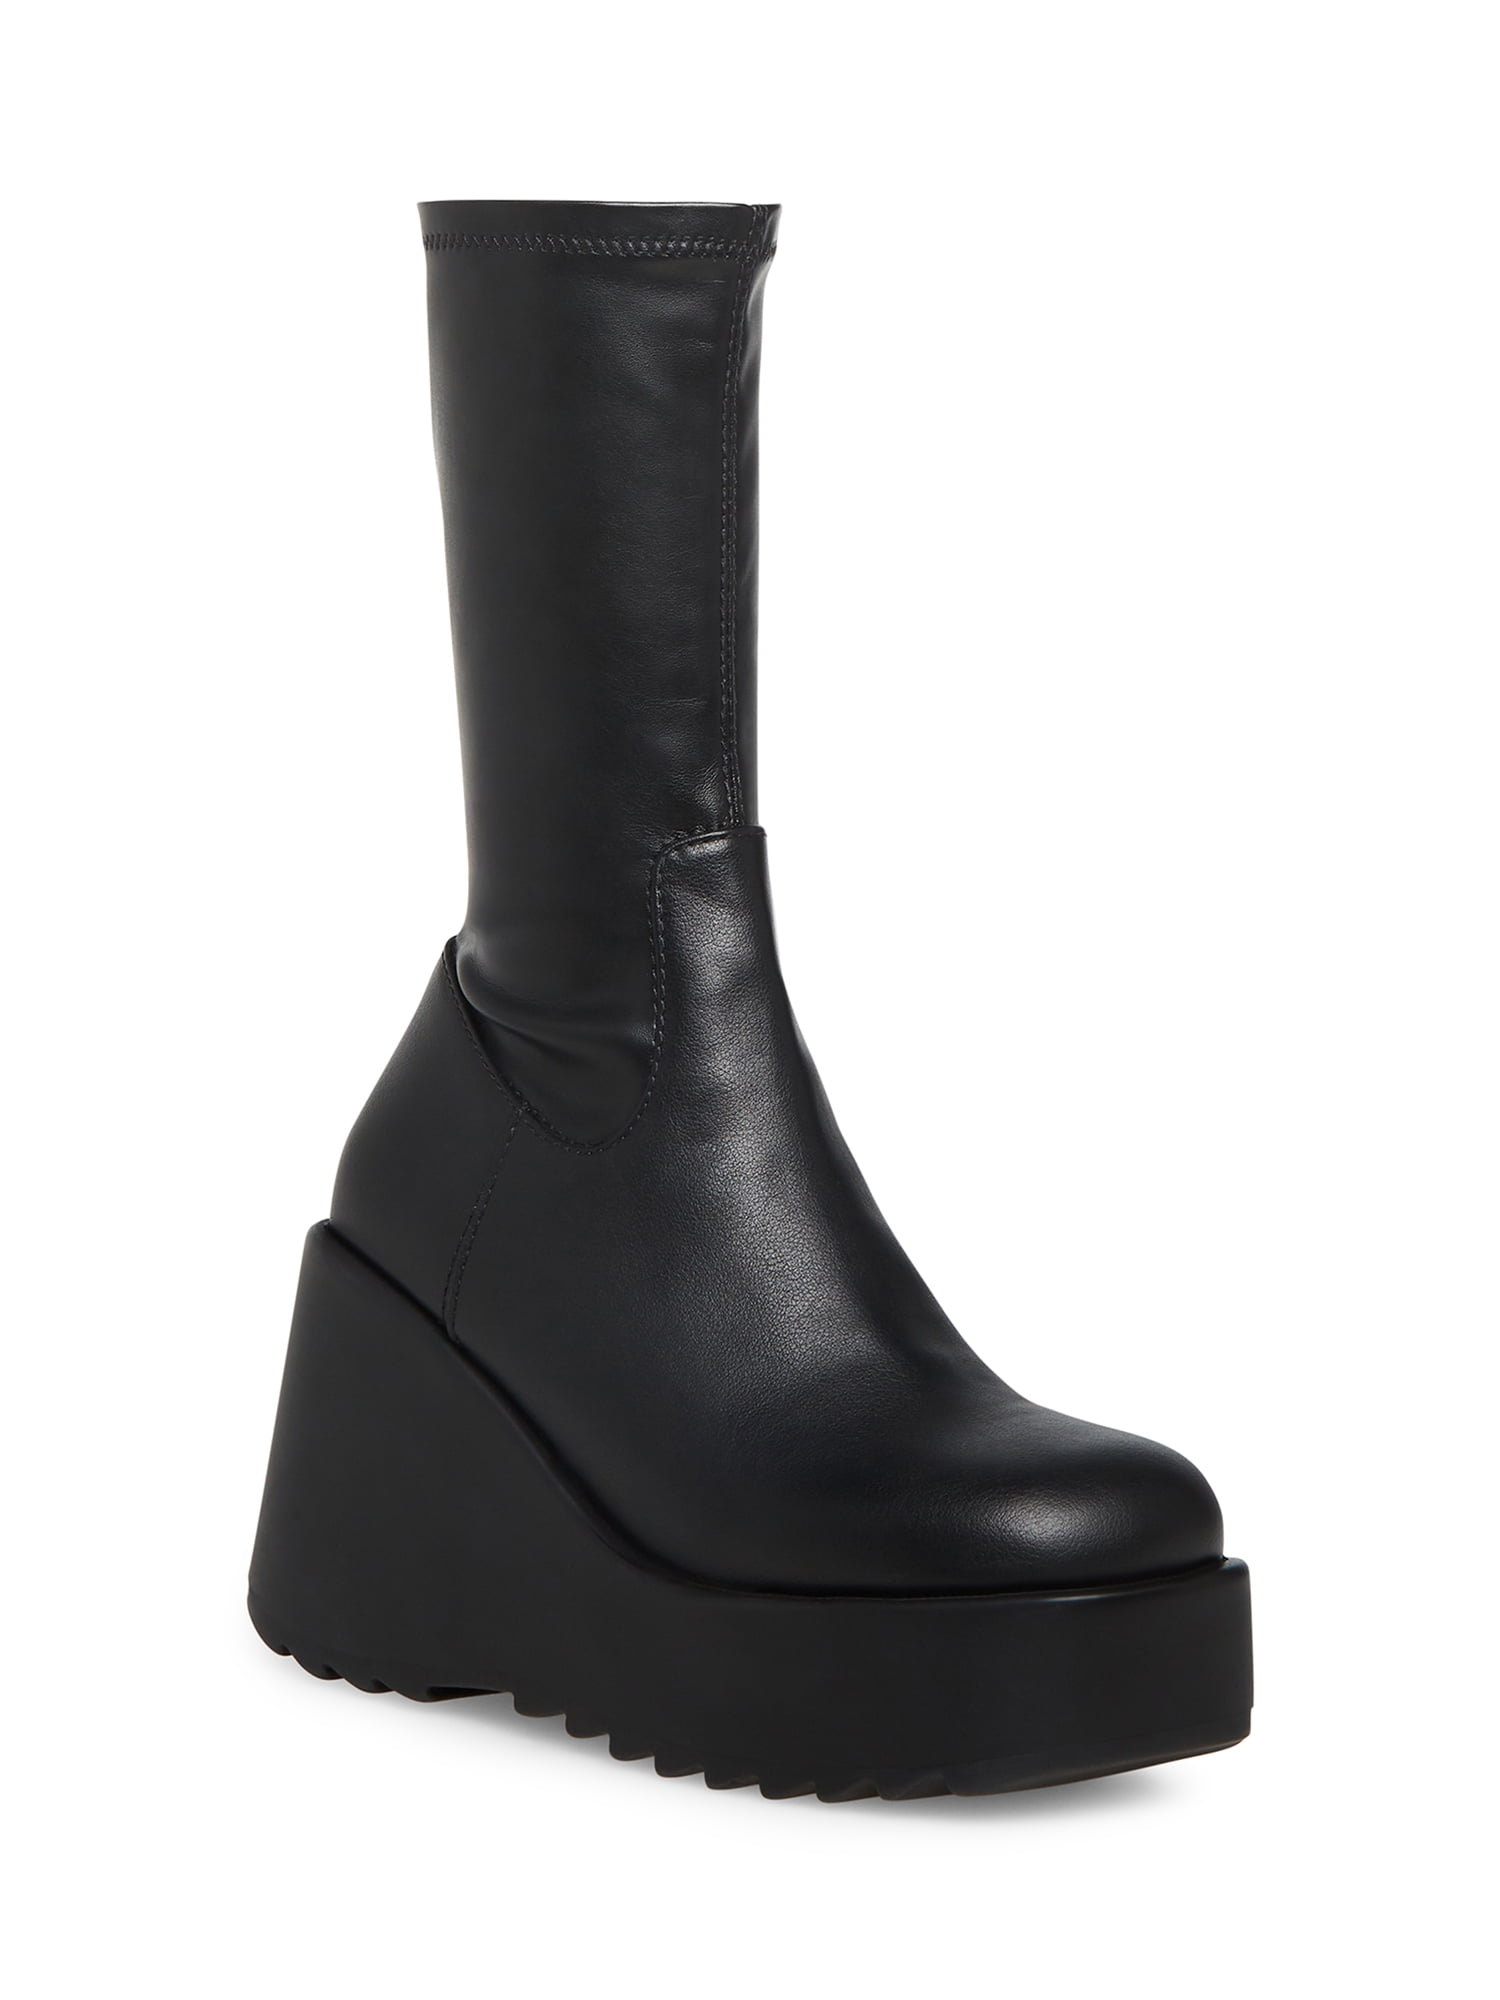 Steve Madden Proceed Pull-On Casual Mid-Calf Boots -